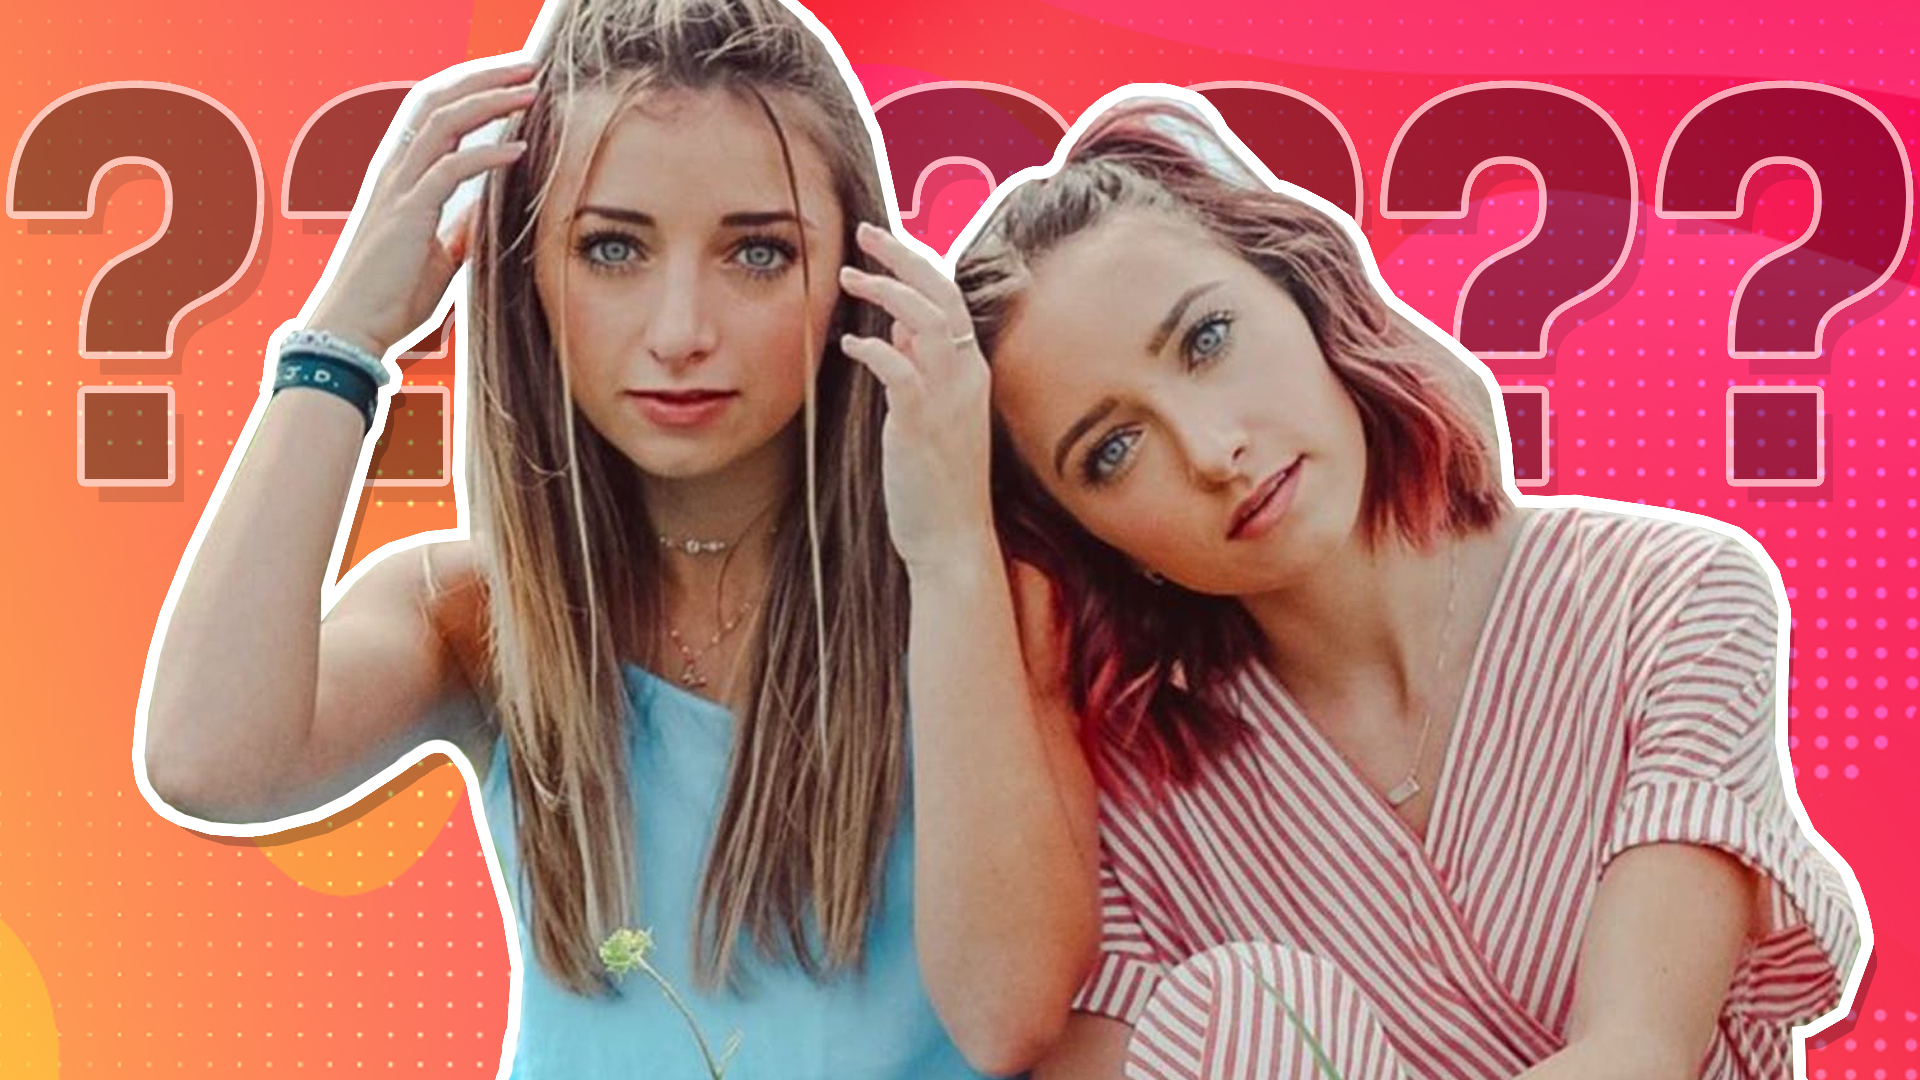 Brooklyn and Bailey personality quiz